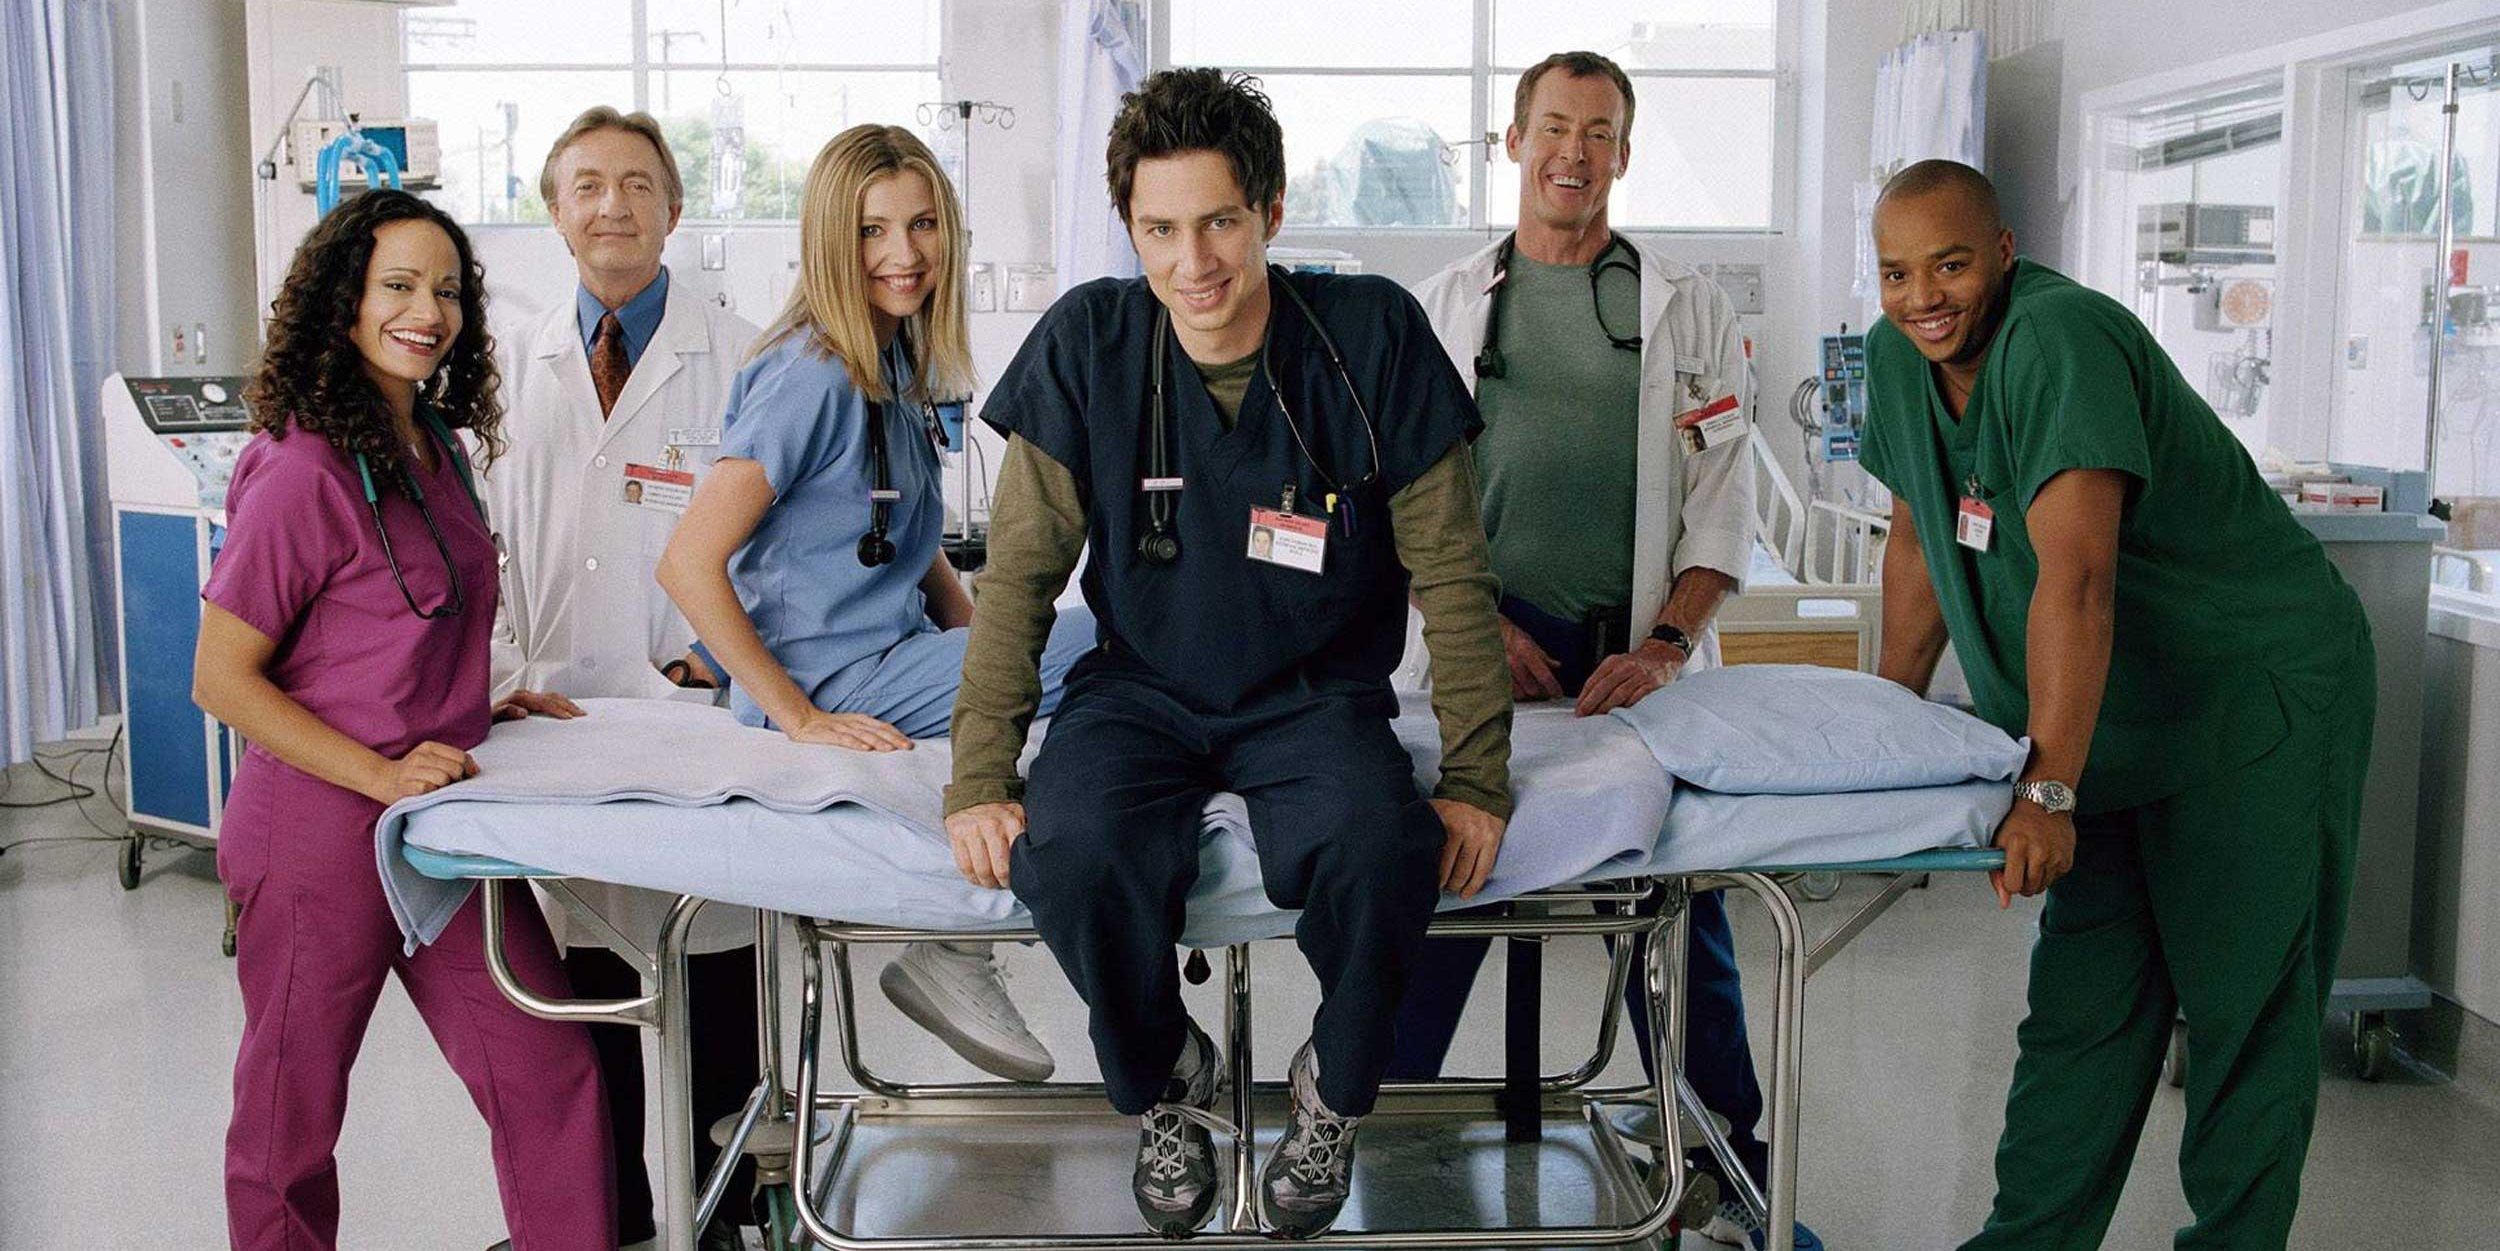 The cast of Scrubs pose for a promotional photo